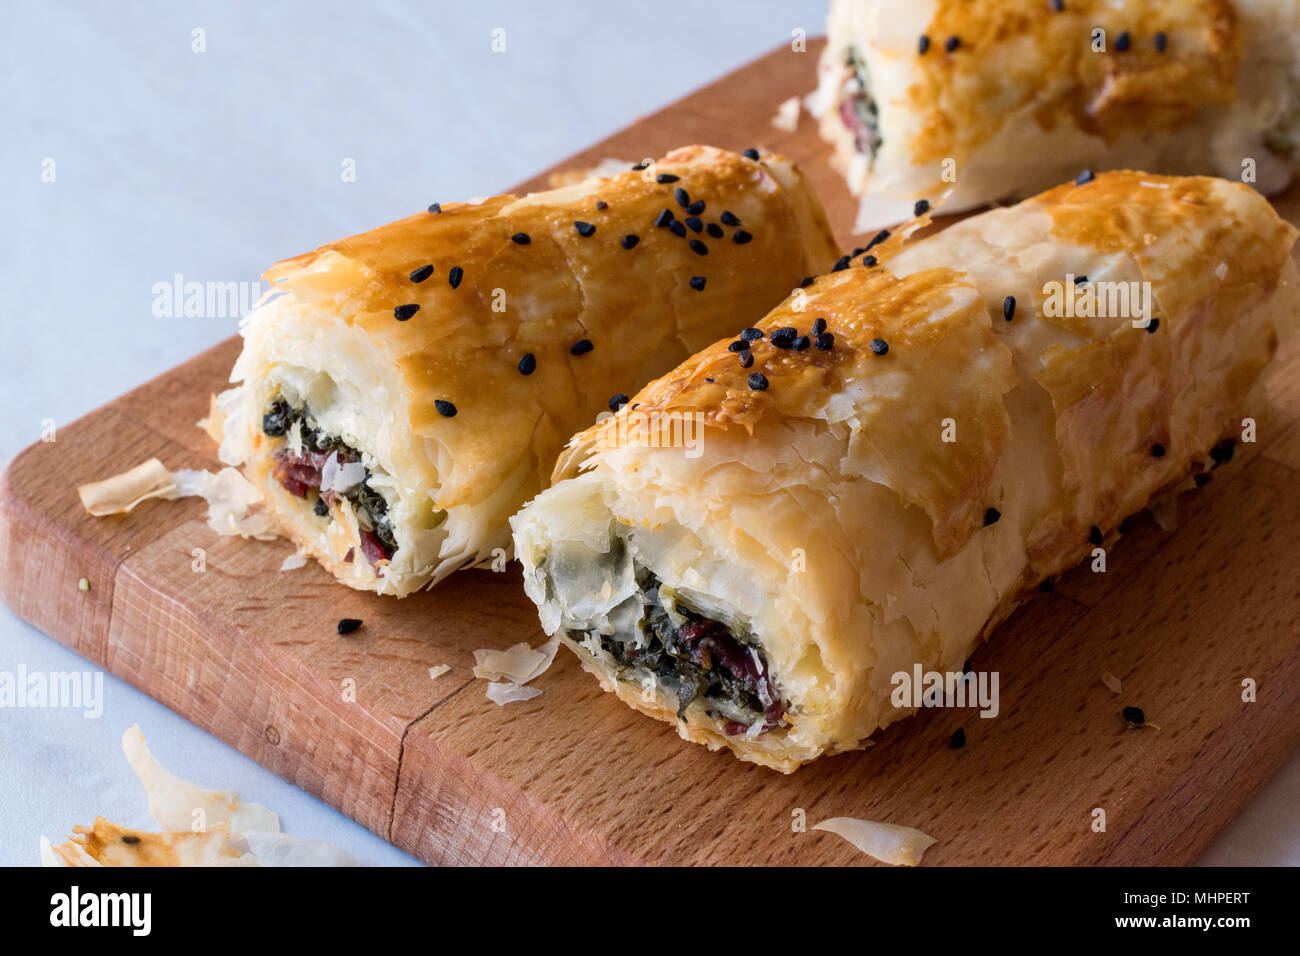 Turkish Borek with Spinach and Pastrami or Pastirma. Traditional Food. Stock Photo